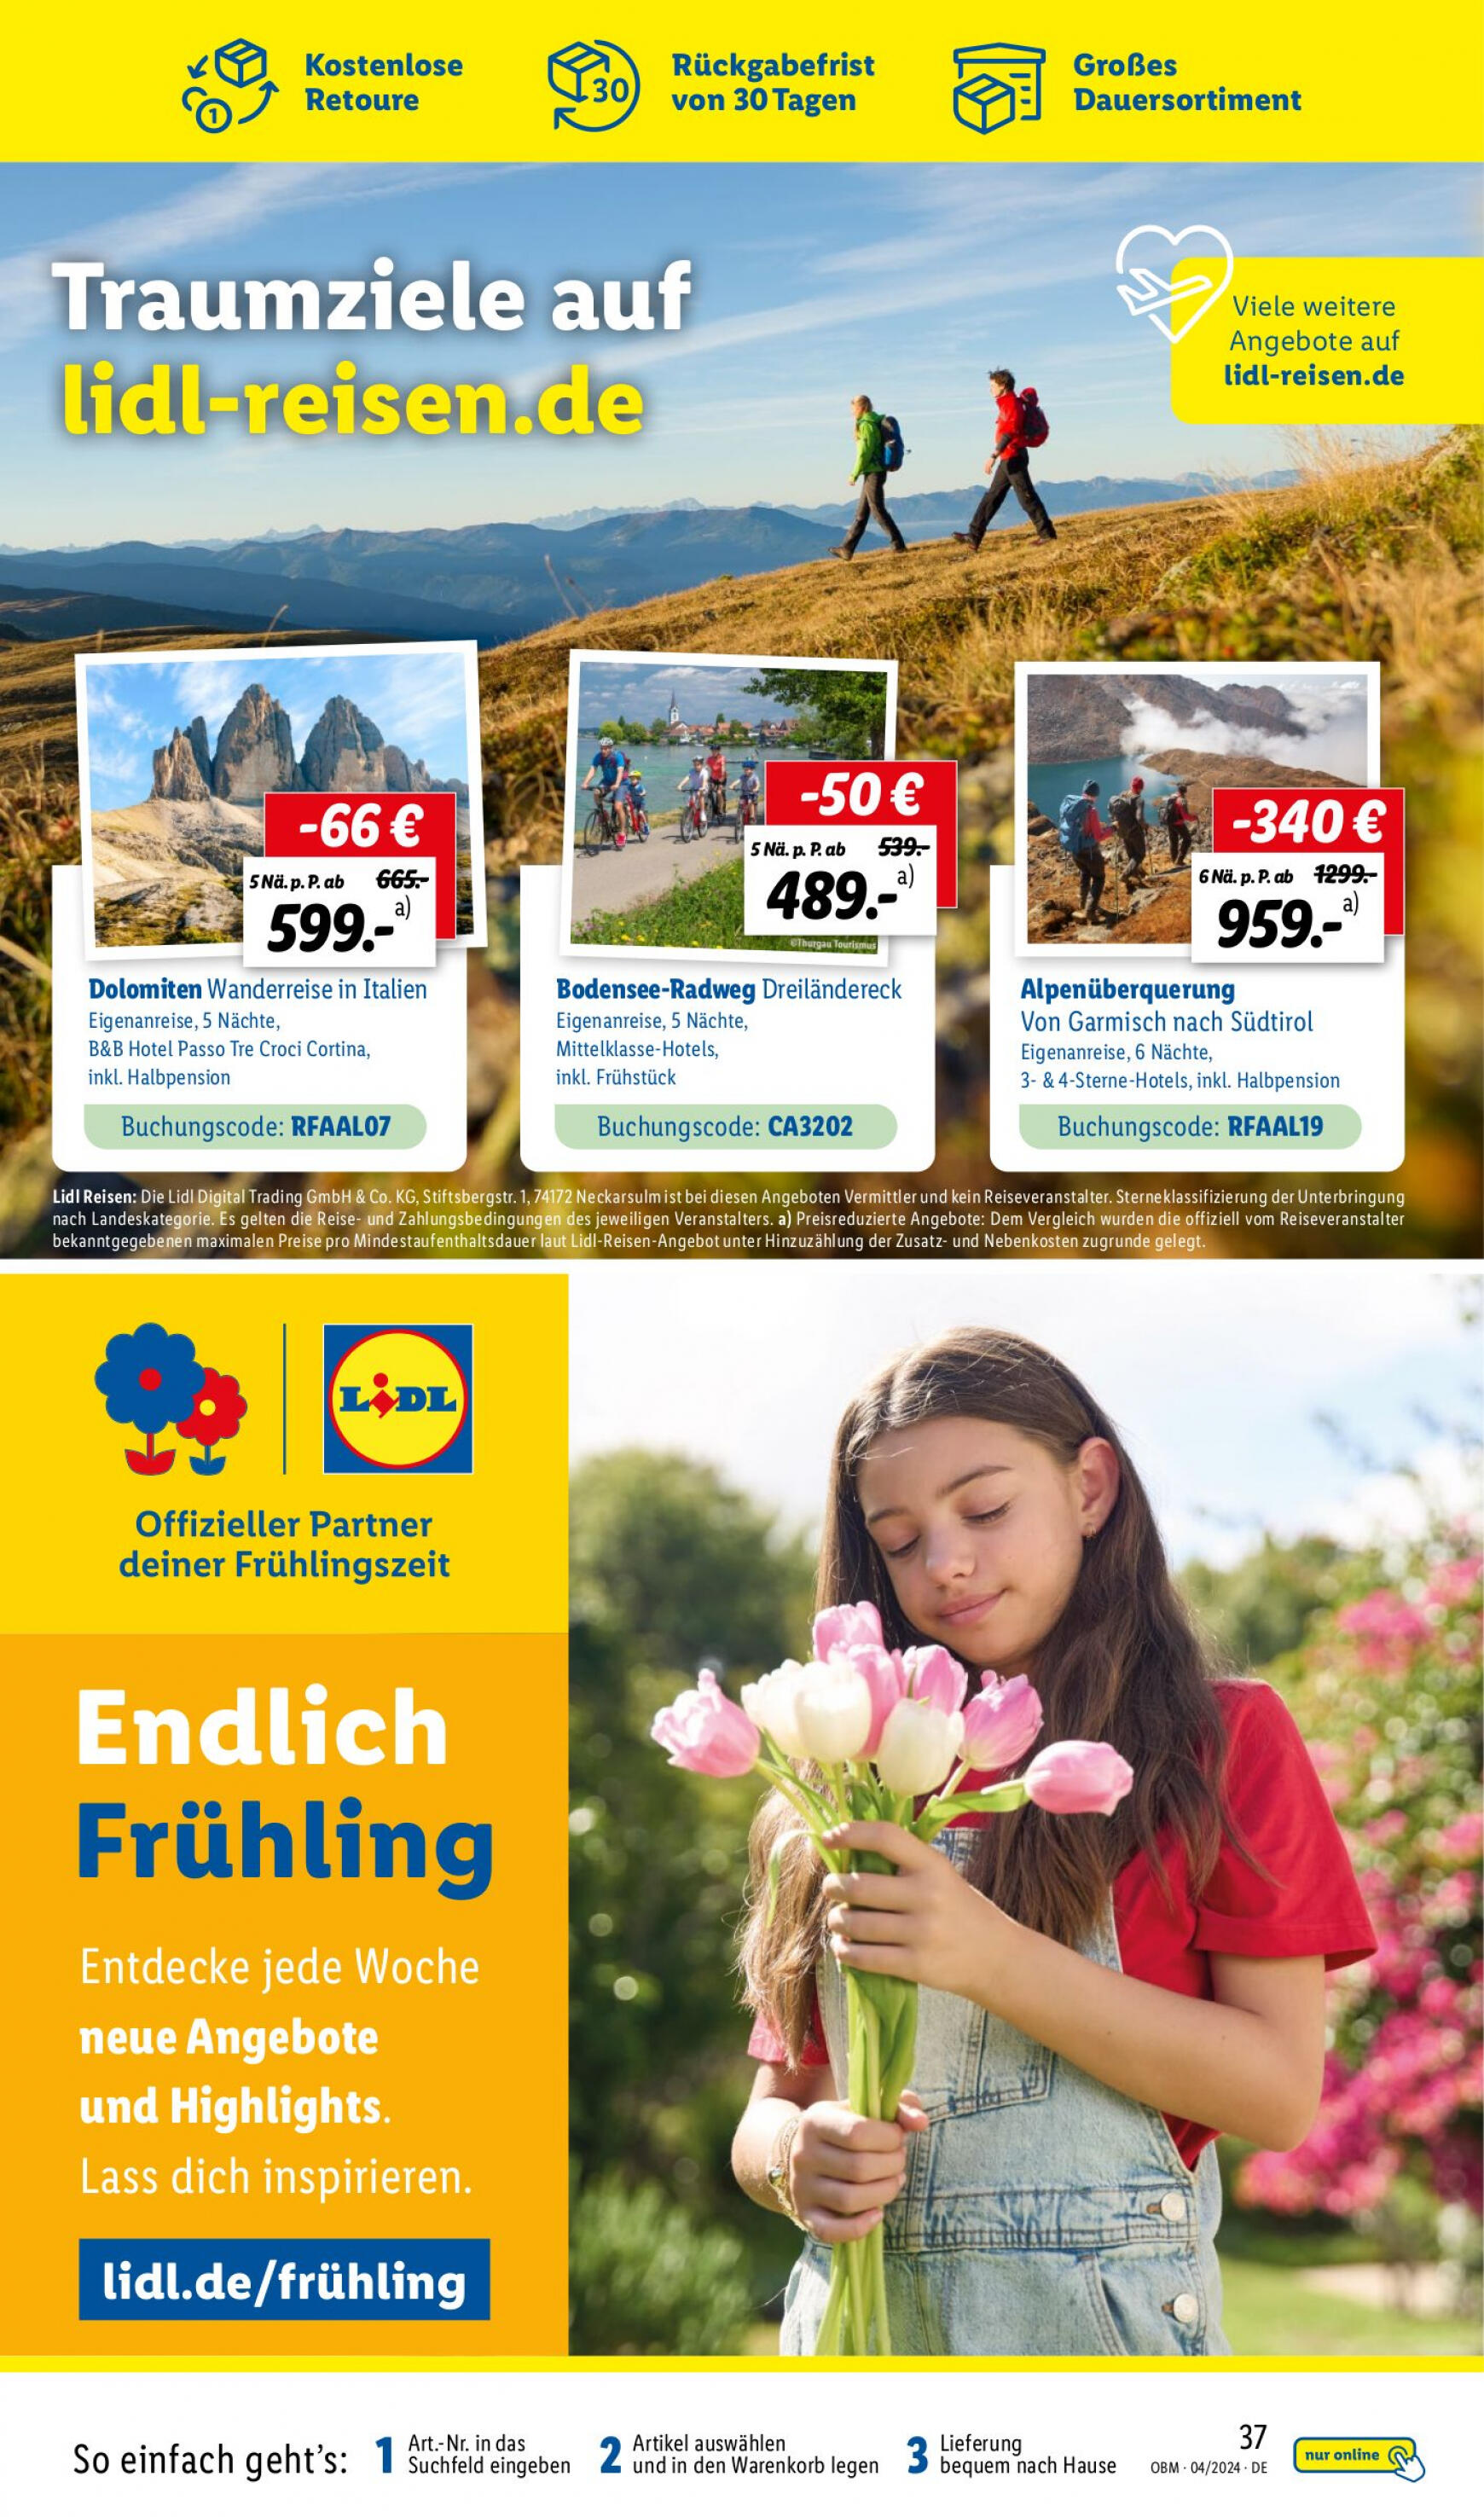 lidl - Flyer Lidl - Aktuelle Onlineshop-Highlights aktuell 01.04. - 30.04. - page: 37